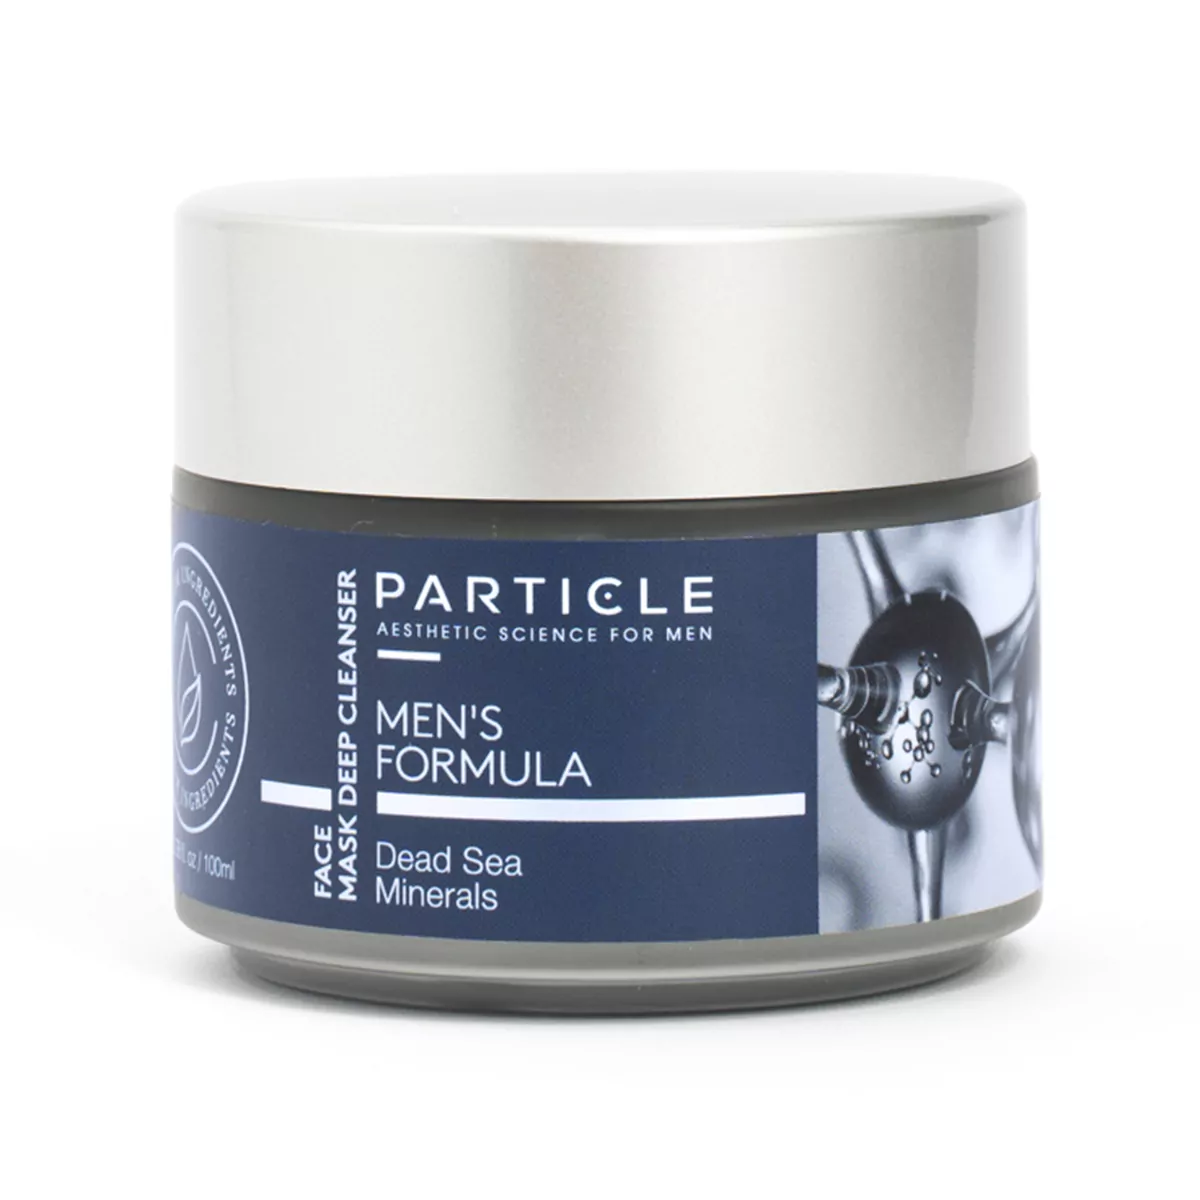 Particle face mask product For Men in blue packaging with a clean white background.